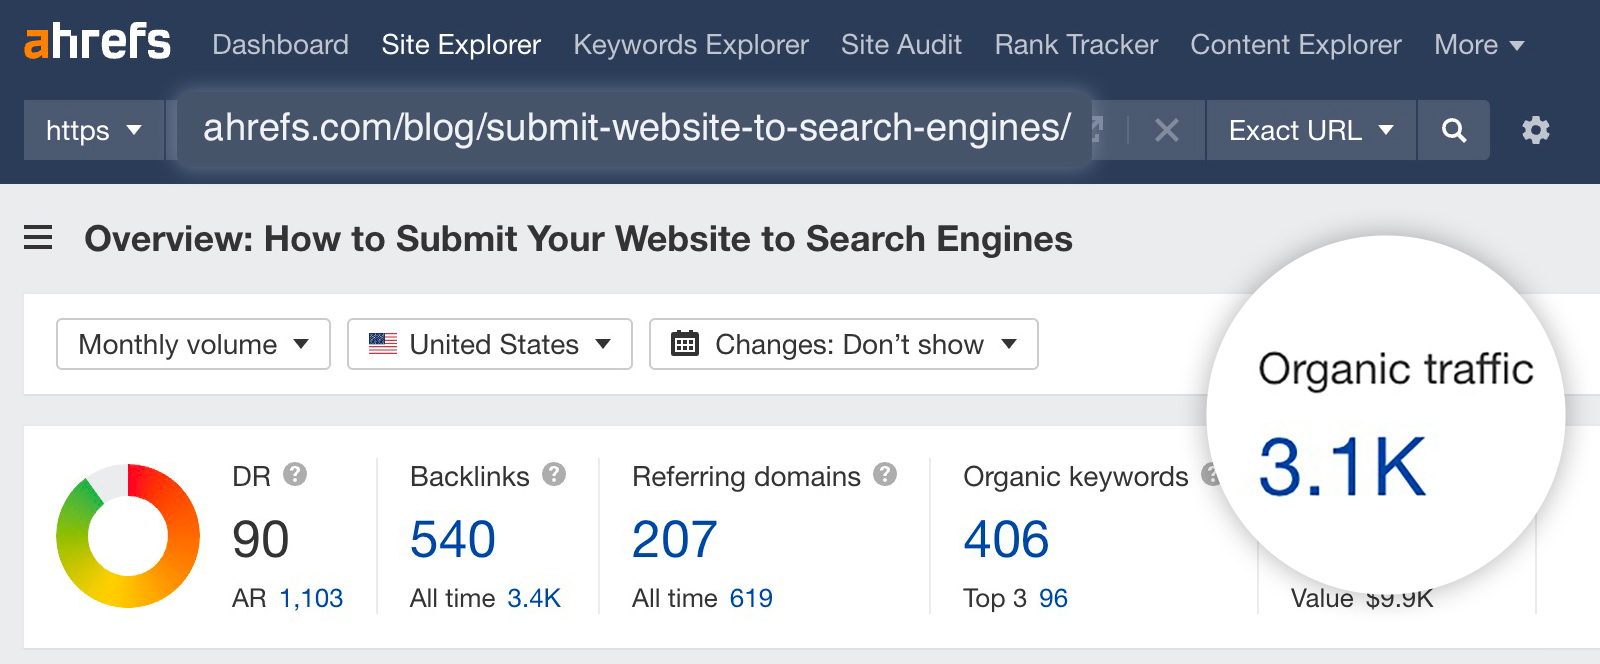 Overview of an Ahrefs blog post about submitting your website to search engines, via Ahrefs' Site Explorer